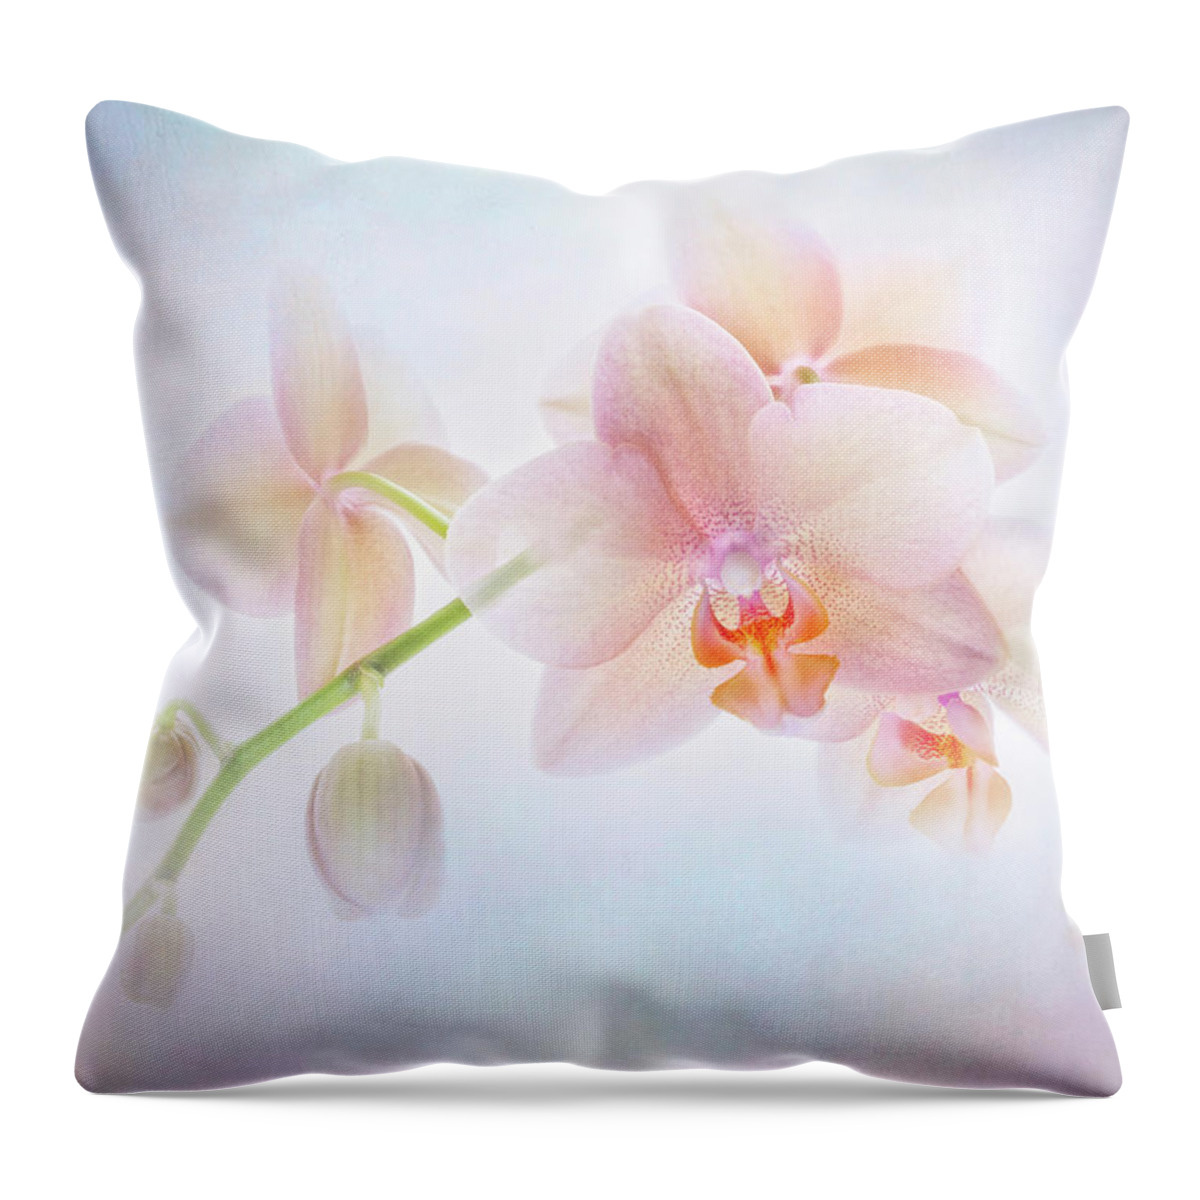 Anemone Throw Pillow featuring the photograph Enlightment. by Usha Peddamatham